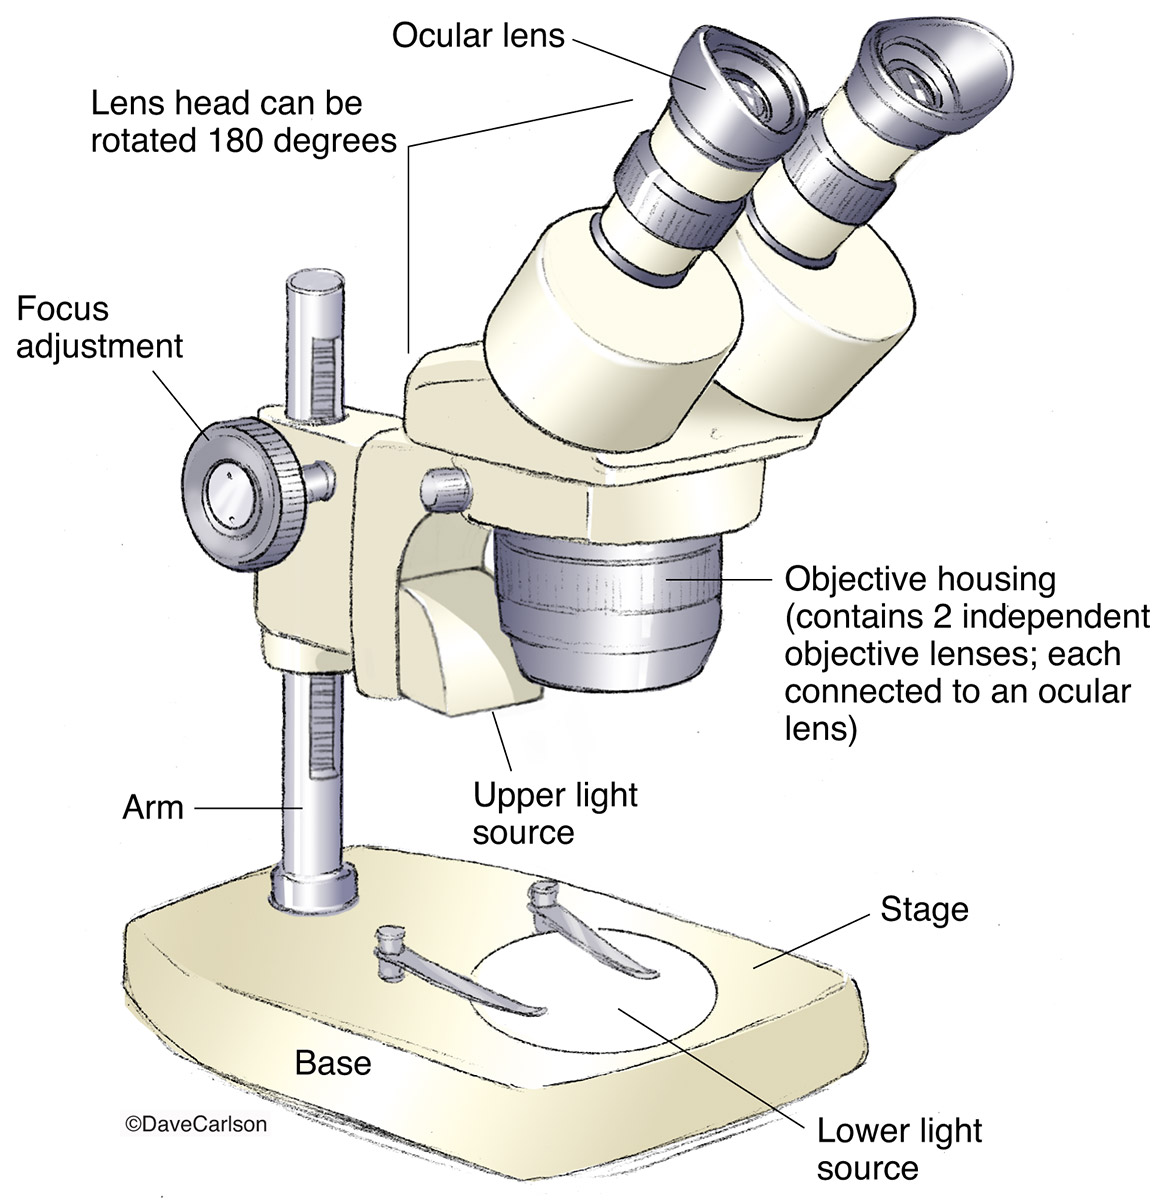 Illustration of a commonly used binocular stereoscope.